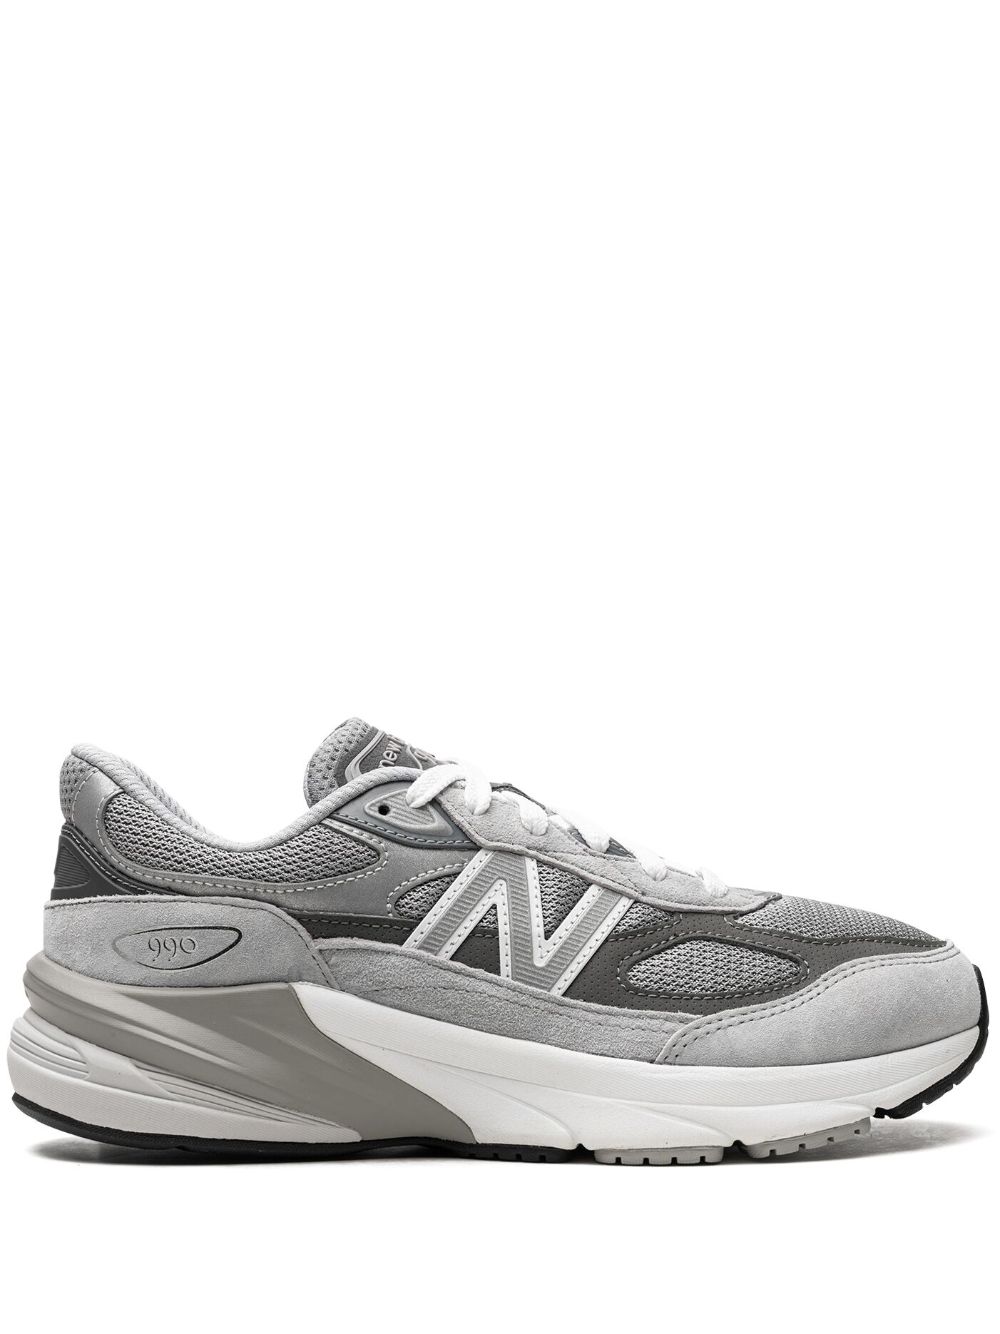 New Balance Fuelcell 990v6 "grey" Sneakers